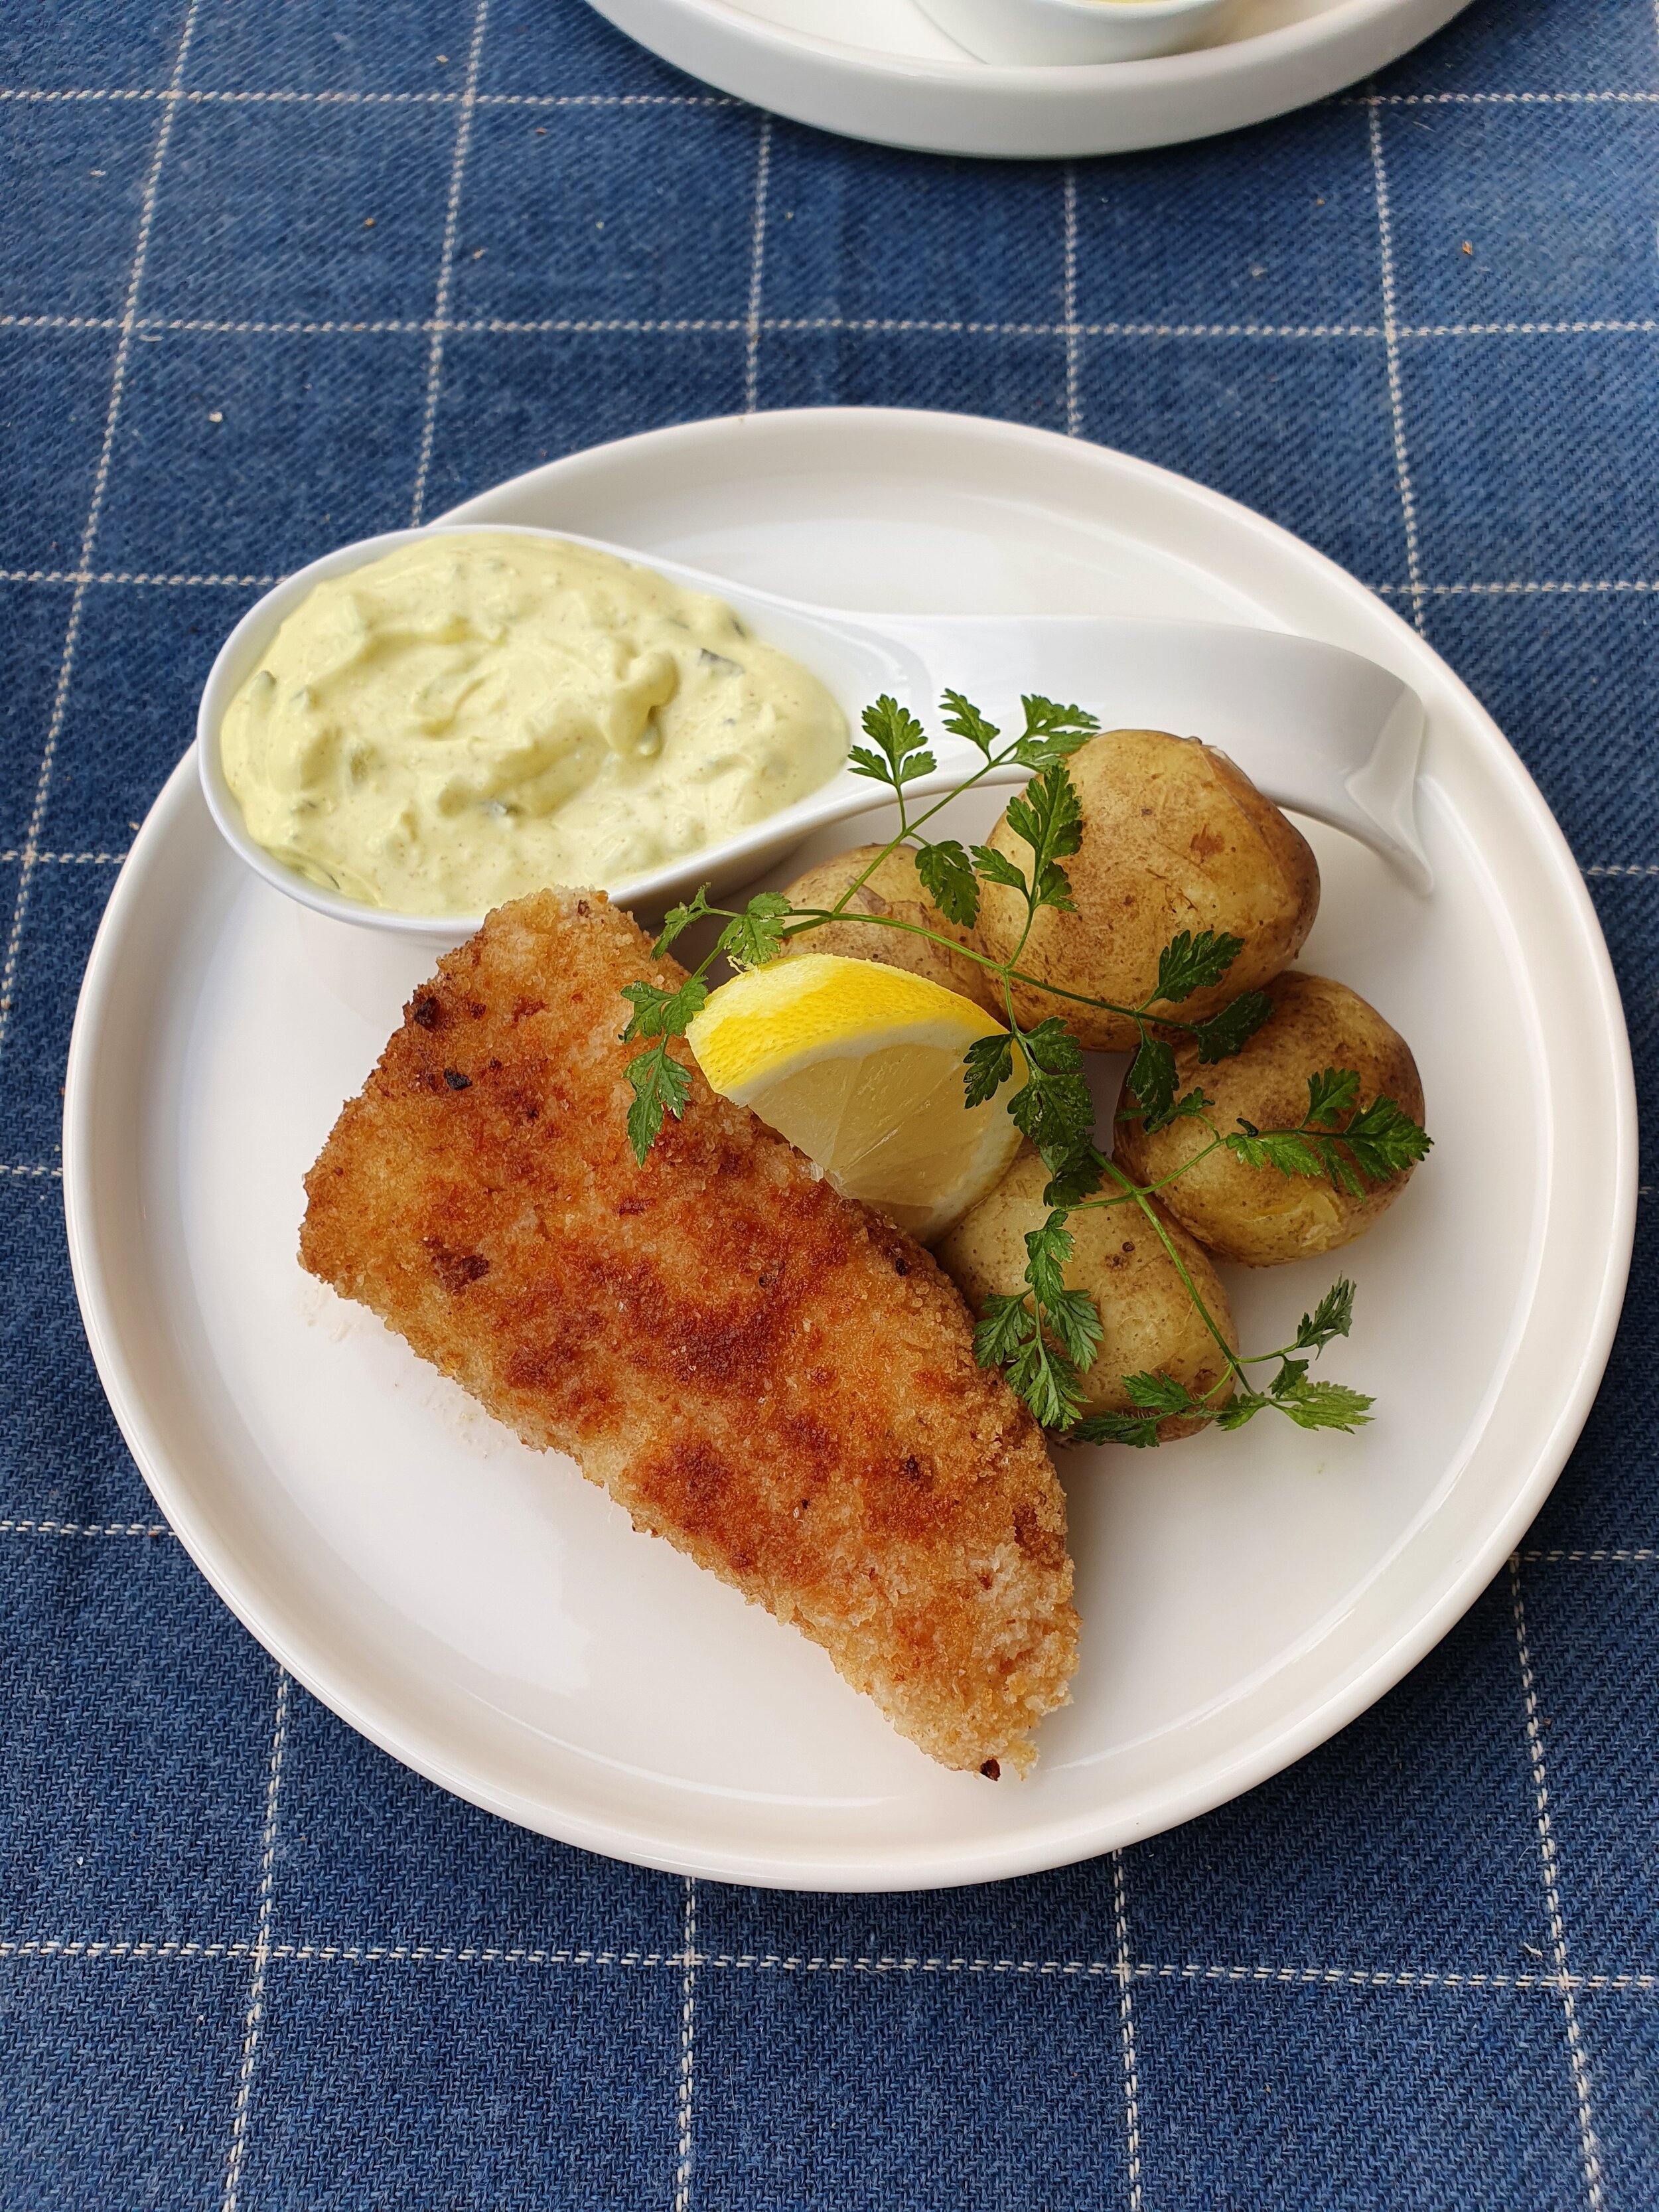 Panko breaded fish with tartar sauce and boiled new potatoes Jimmy's